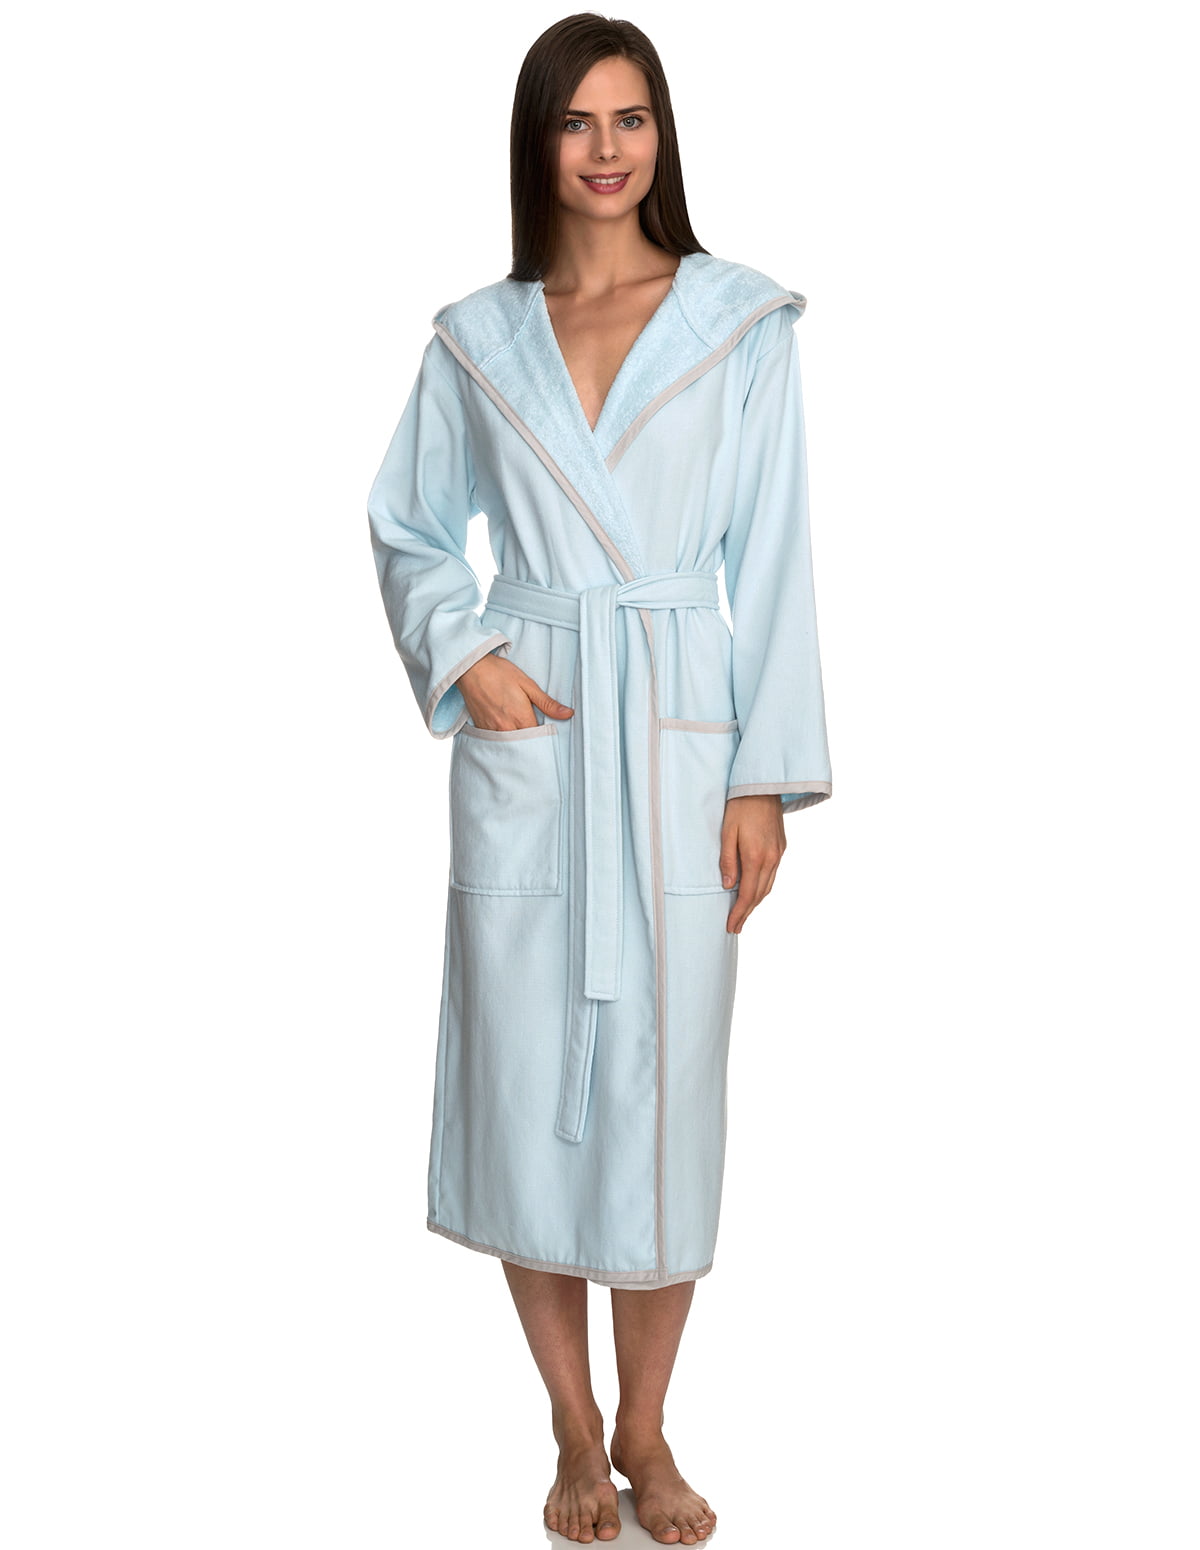 TowelSelections - TowelSelections Women's Robe, Cotton Lined Hooded ...